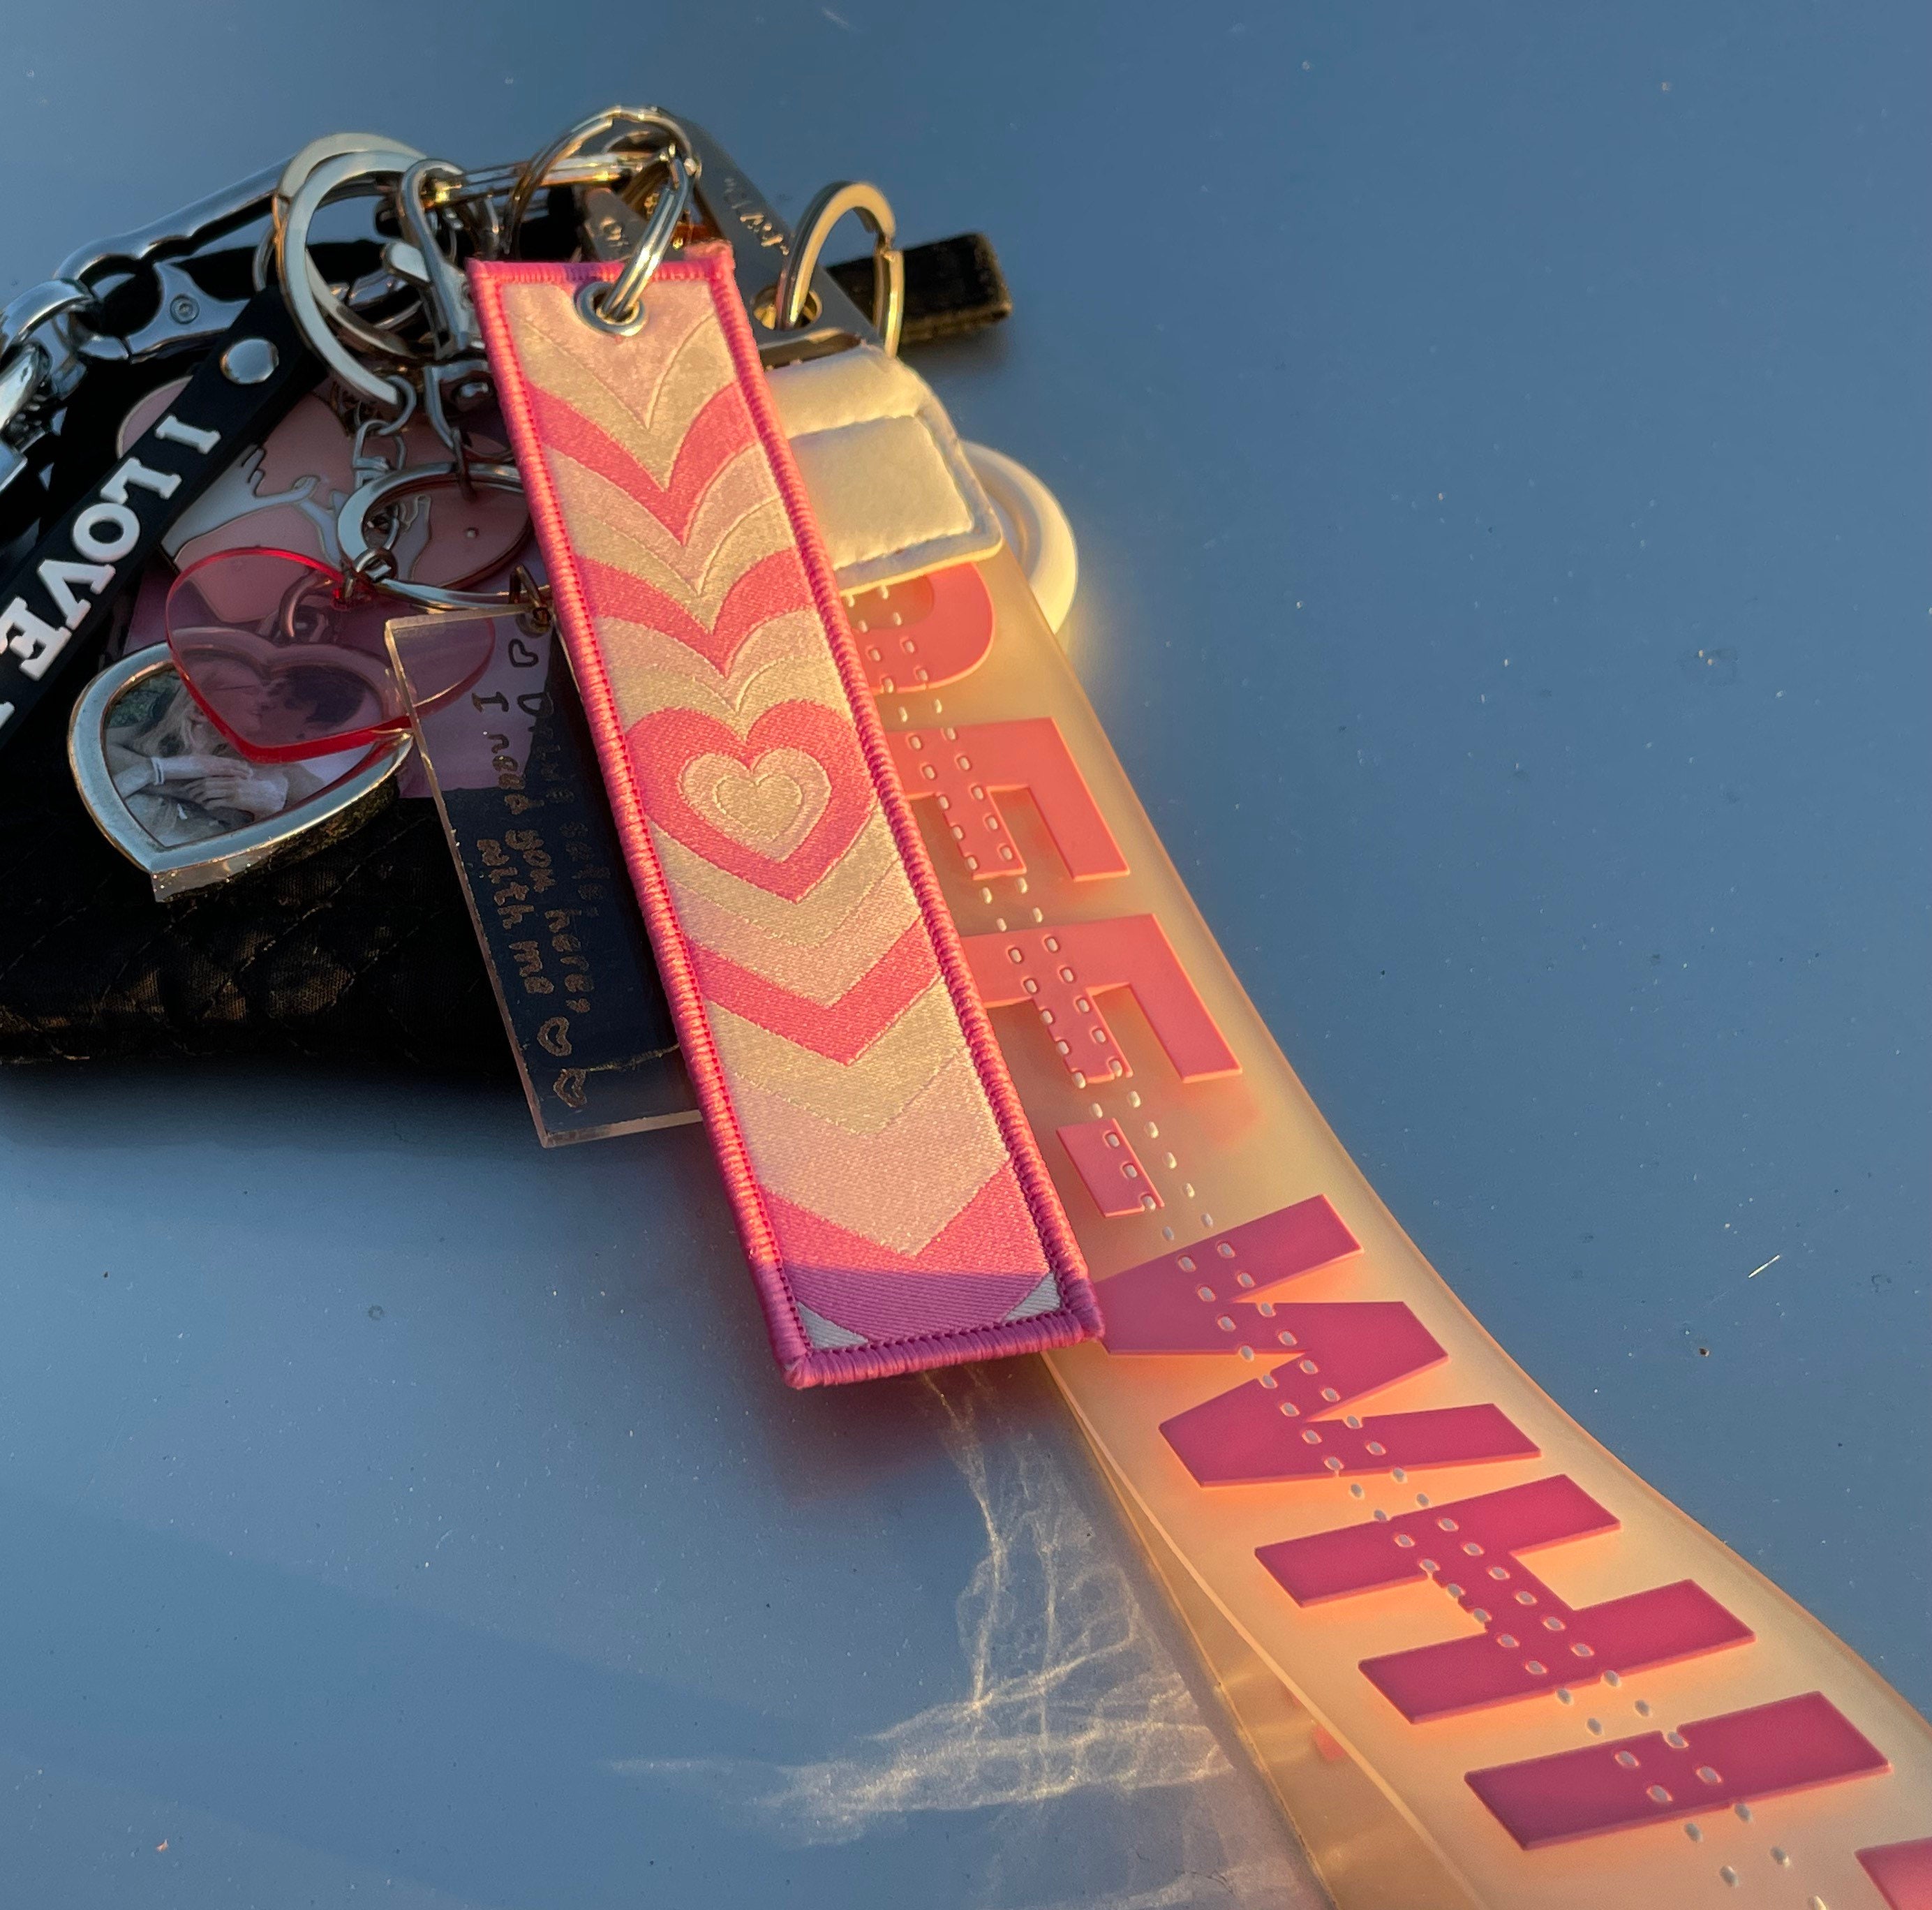 Pink and Gold Keychain